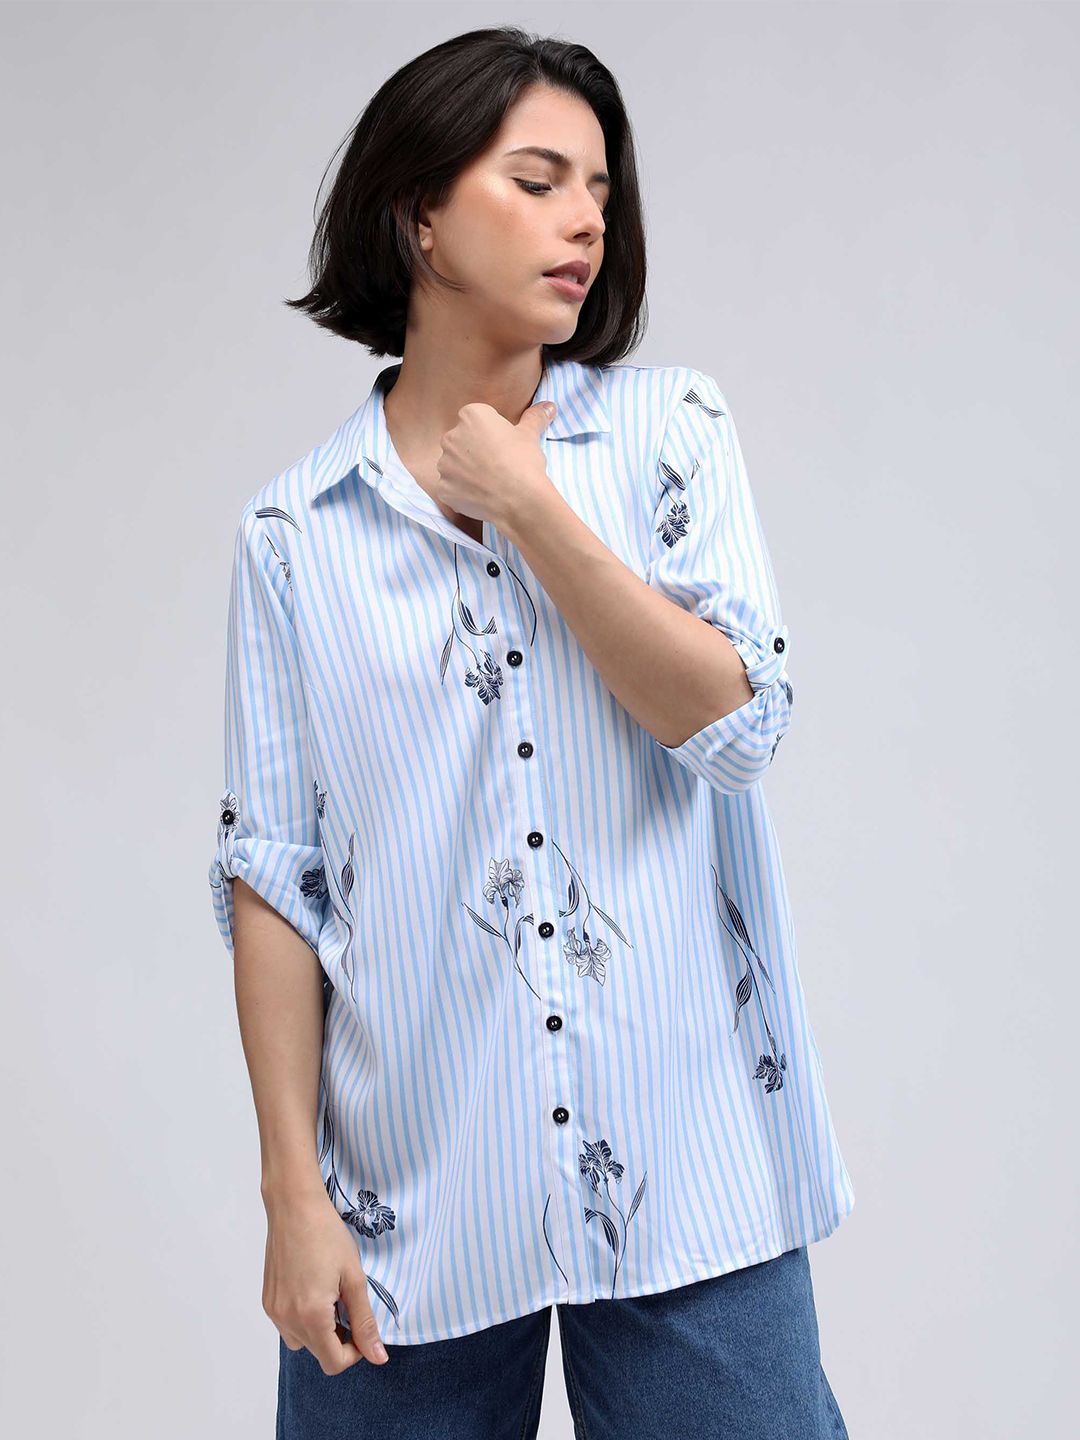 IDK Women Blue Striped Roll-Up Sleeves Shirt Style Top Price in India